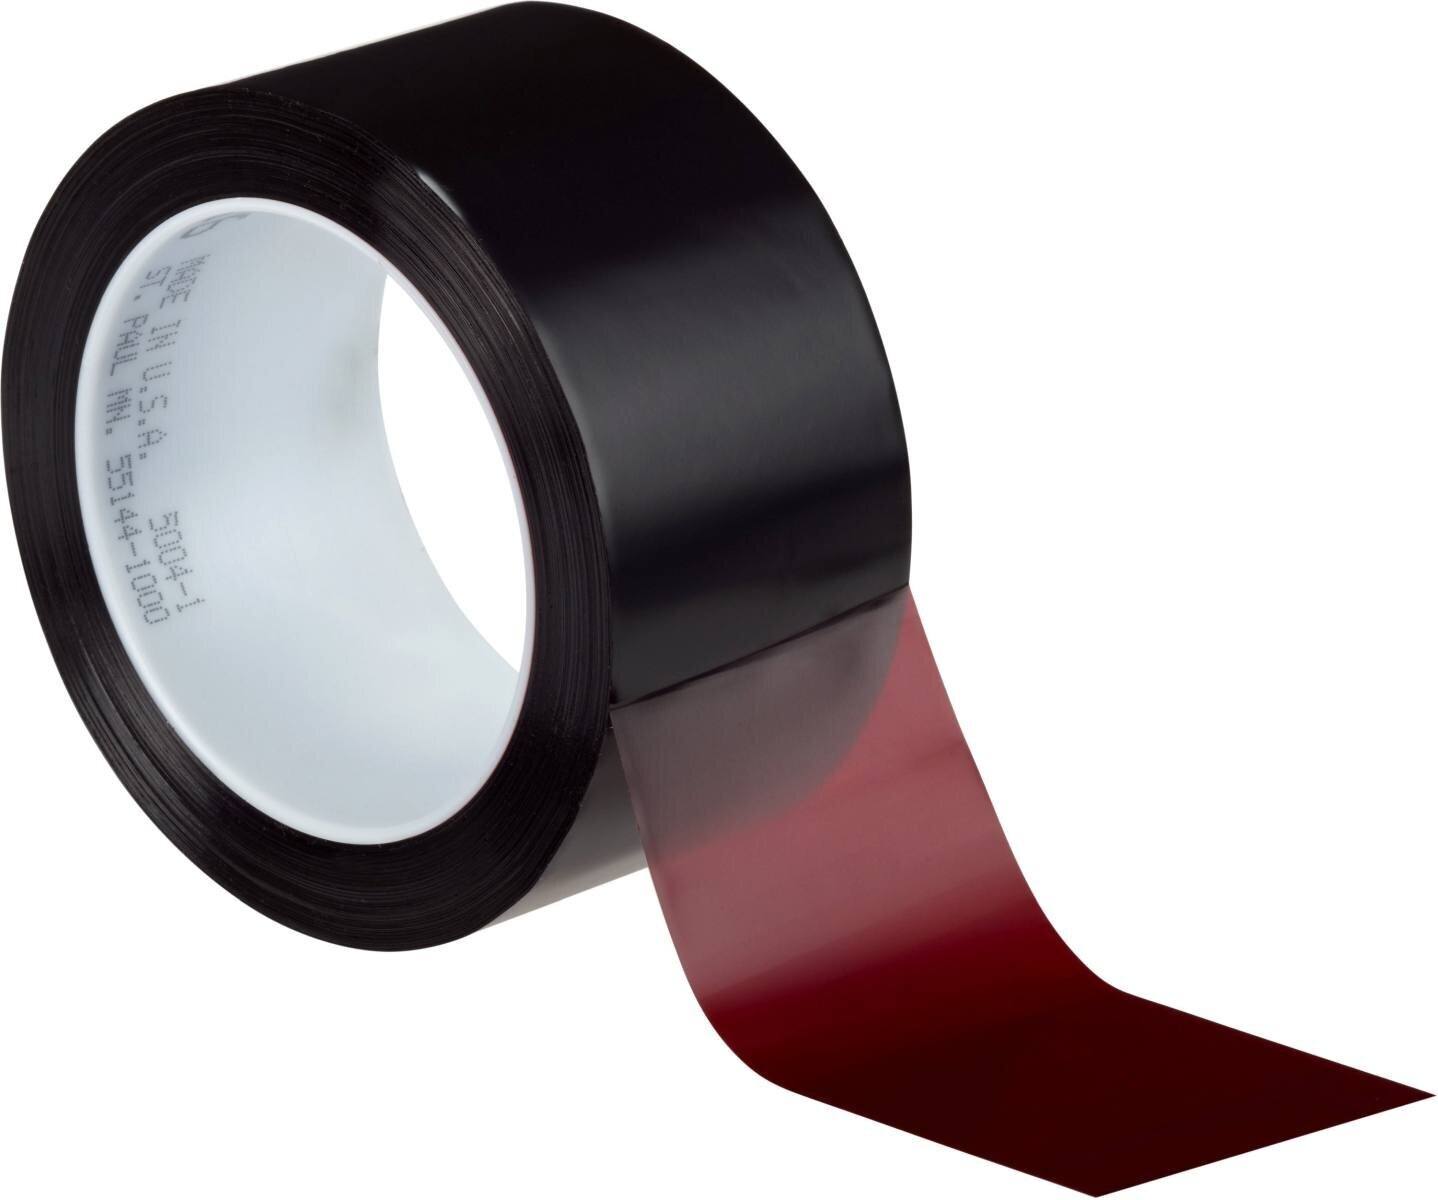 3M Lithographic adhesive tape 616 19 mm x 66 m